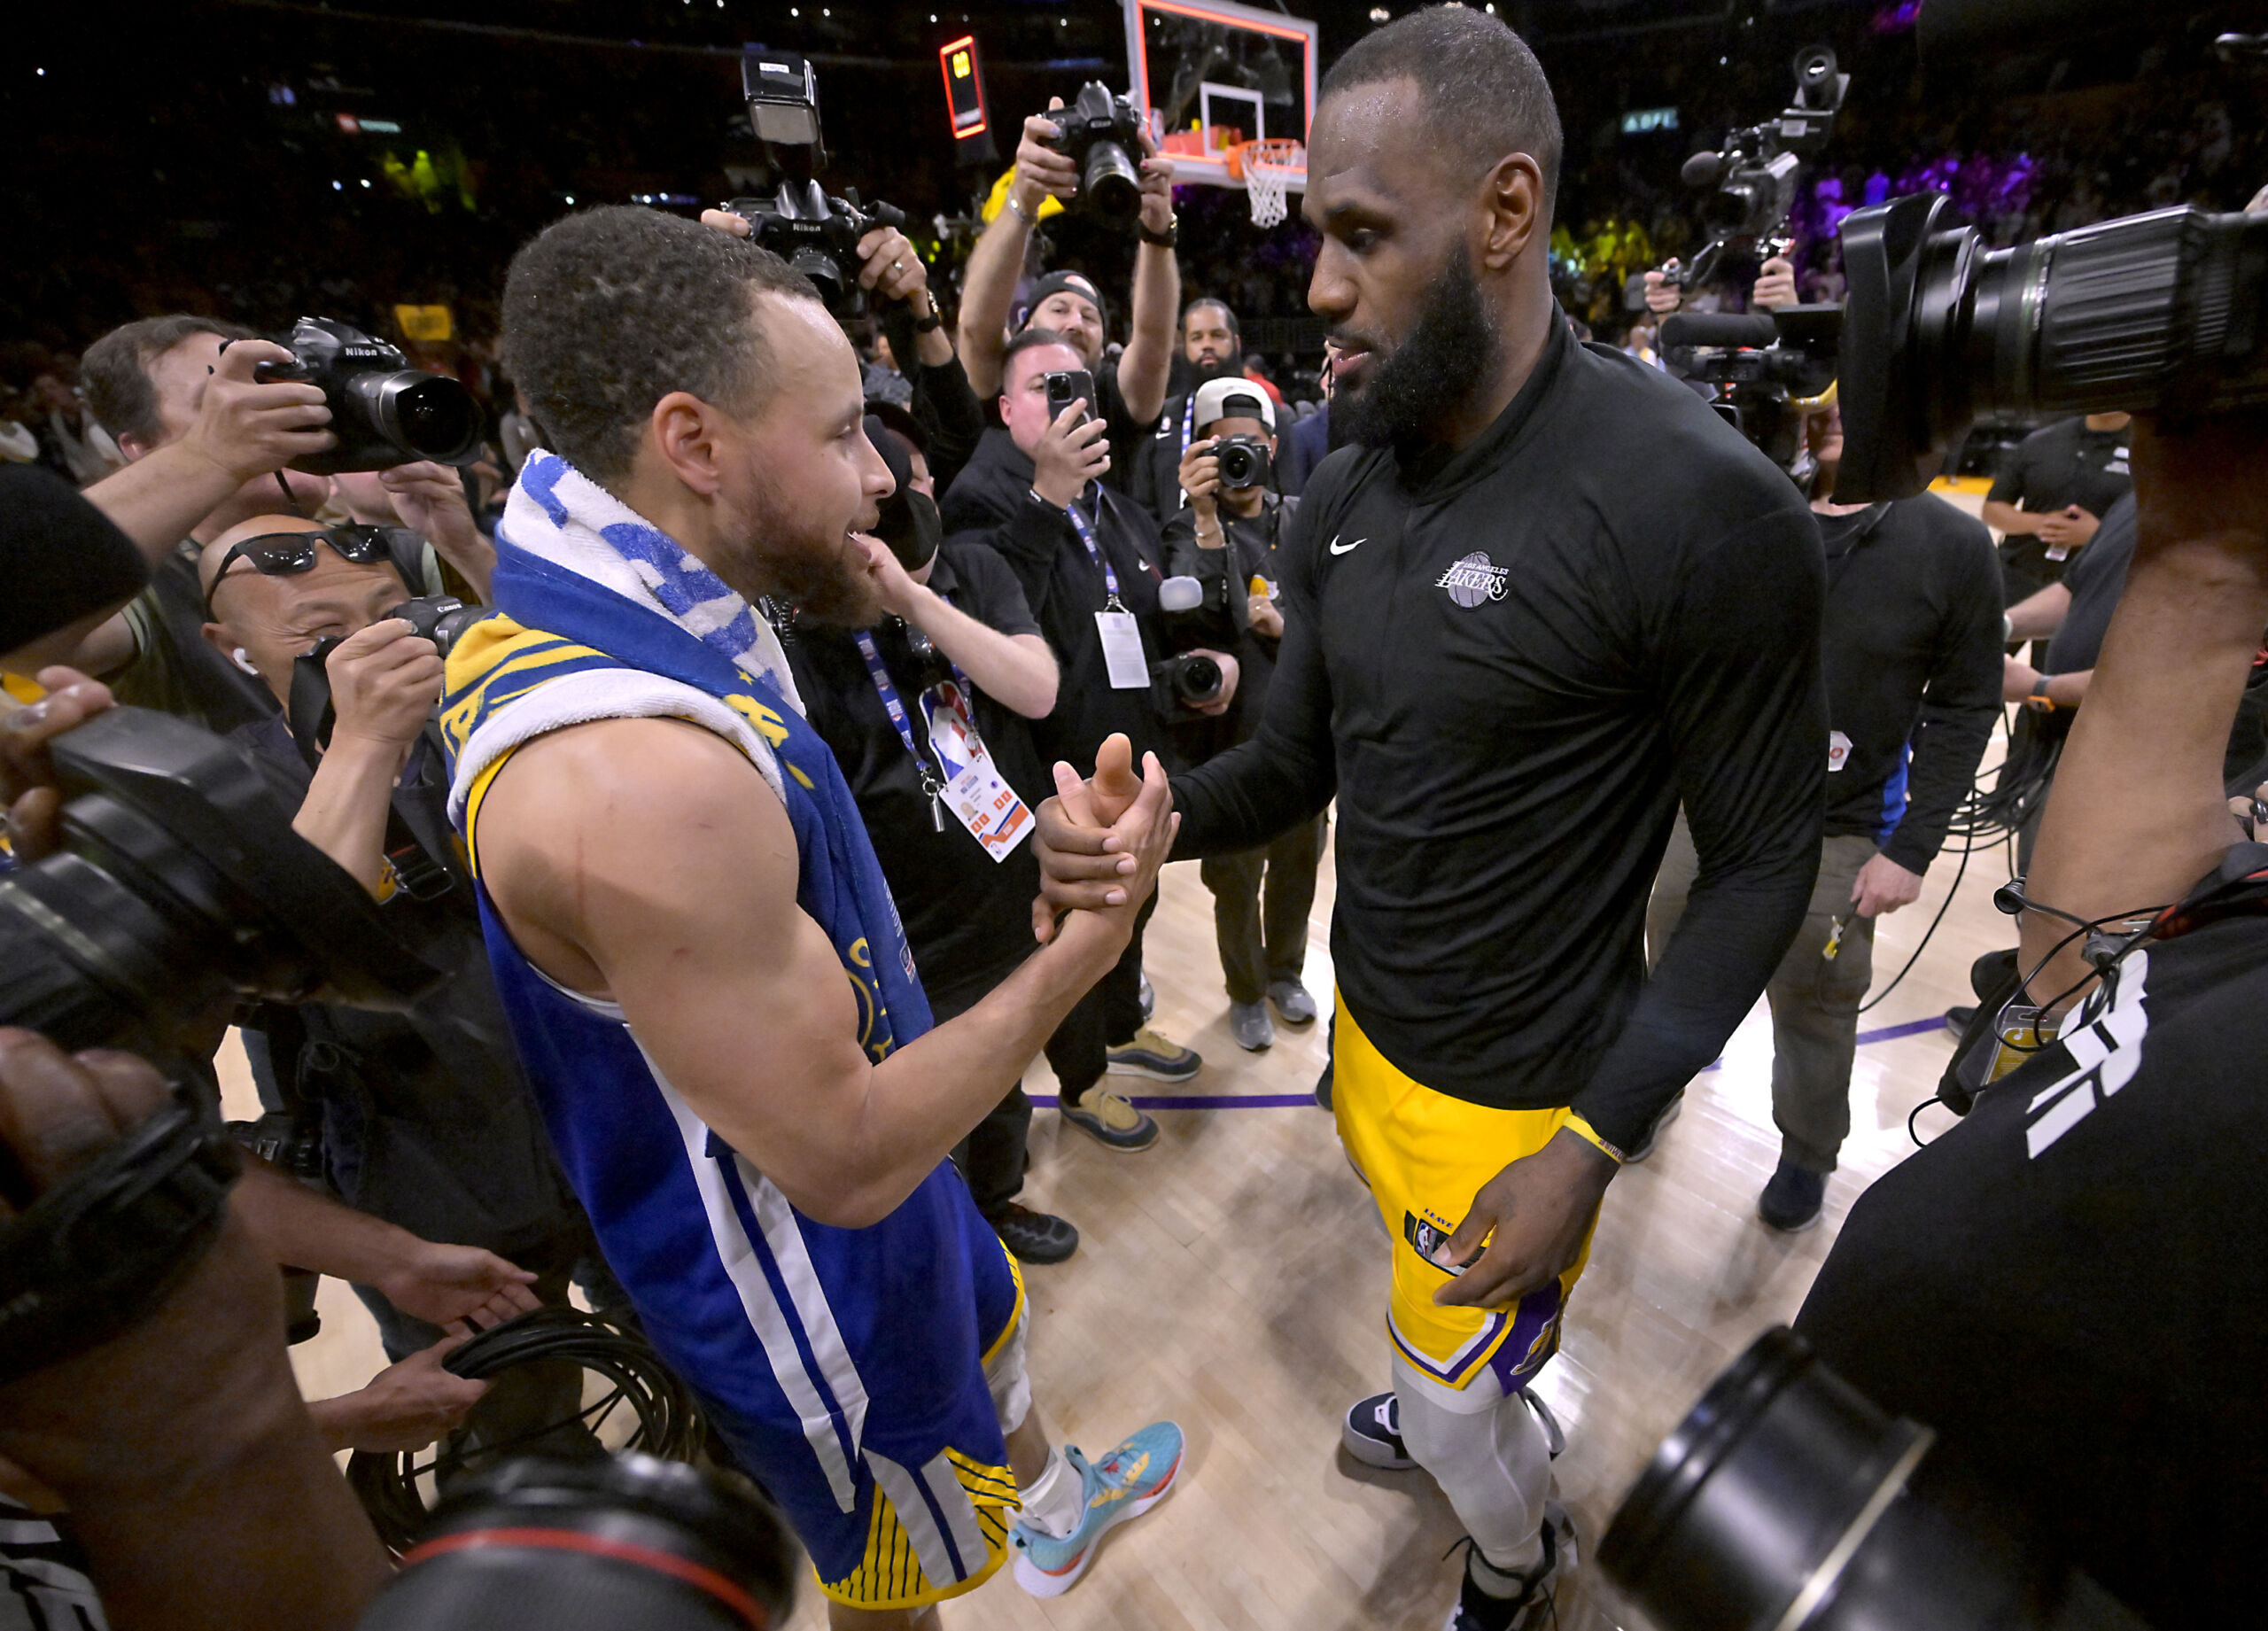 LeBron James Says He Wants to Play With Steph Curry - Inside the